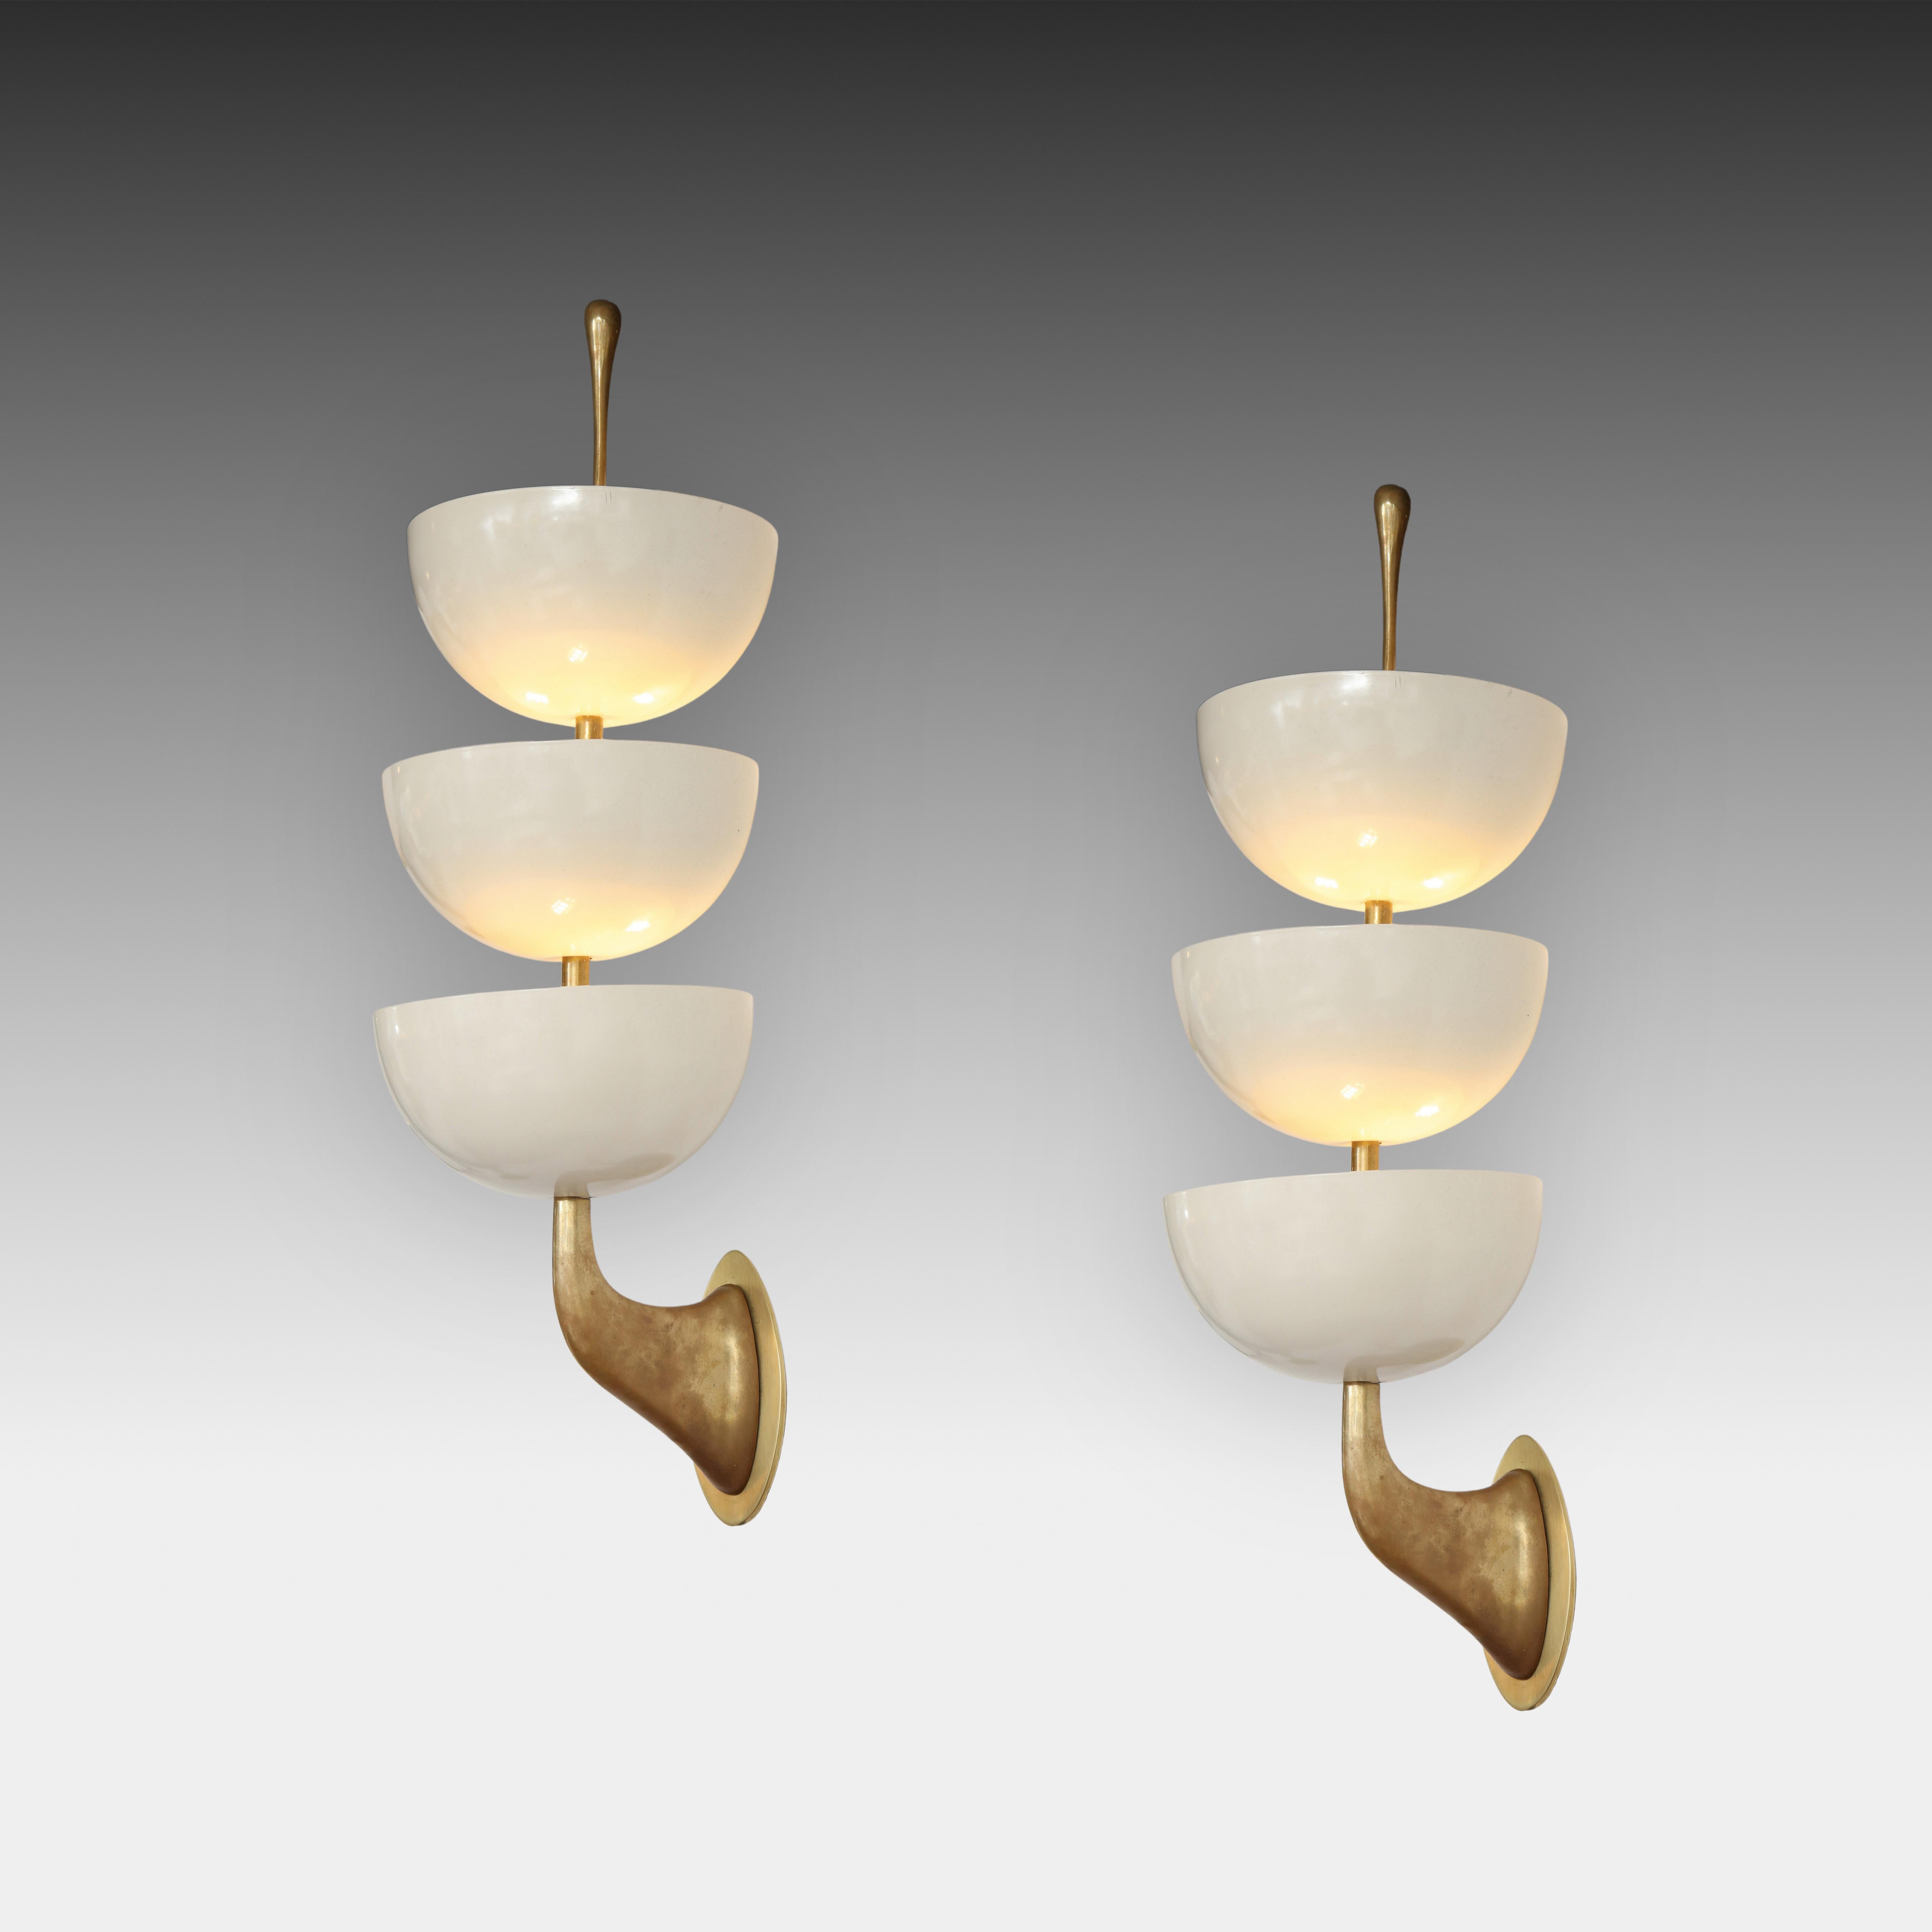 Stilnovo rare original and exquisite pair of sconces with three eggshell white lacquered metal cups mounted on gilt lacquered brass structure, Italy, circa 1952. Stamped 'STILNOVO' on finials. 
Rewired to U.S. standards with UL listing and custom